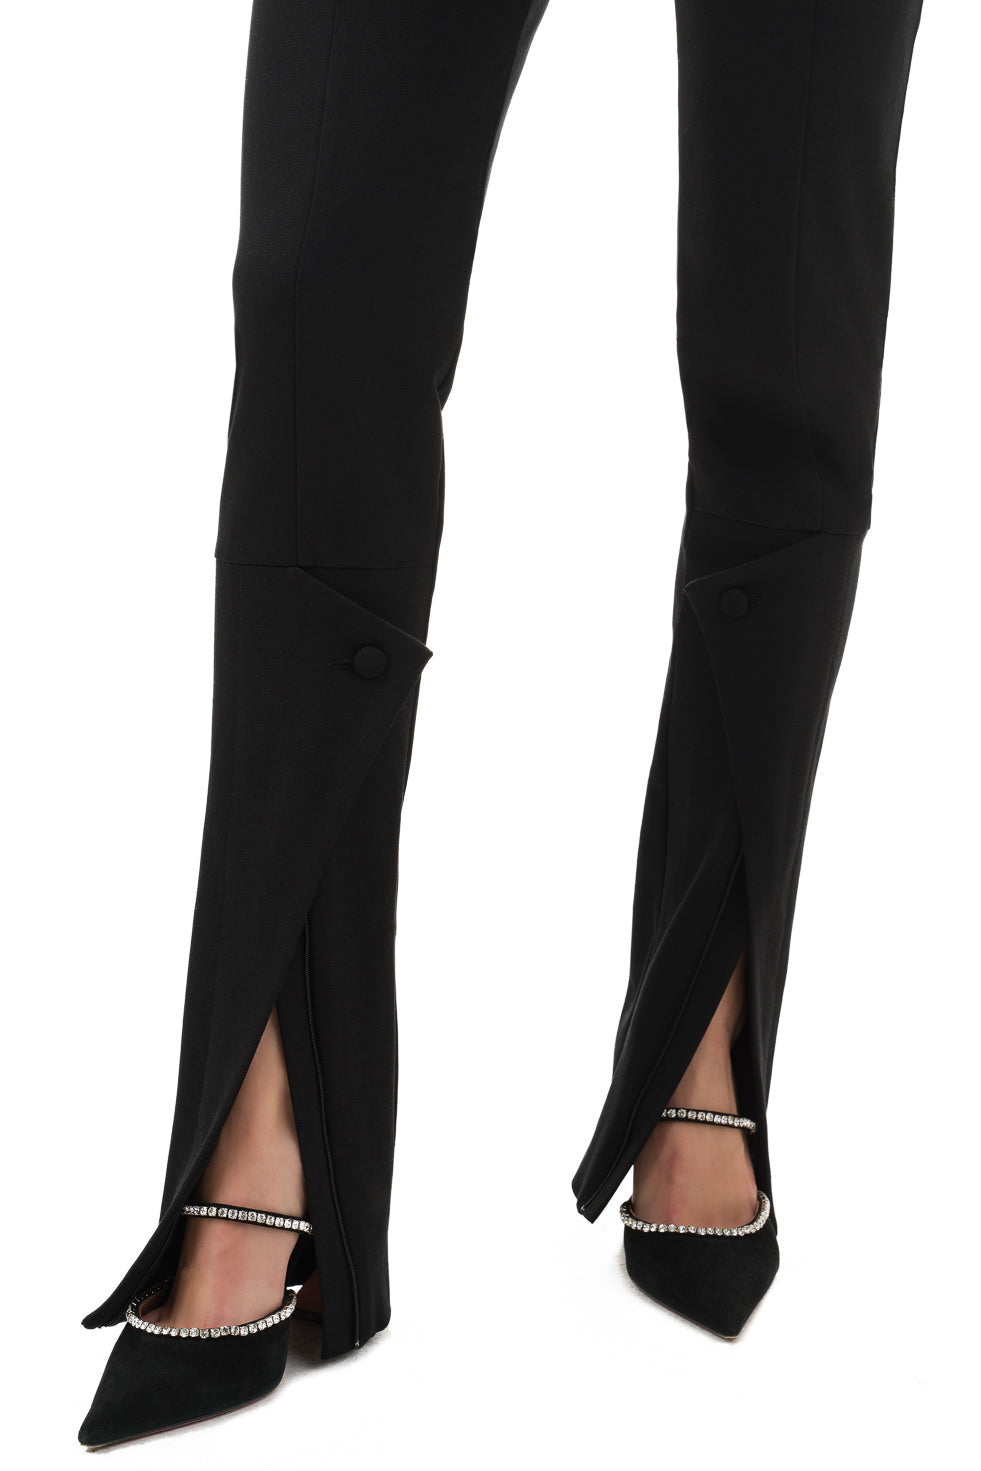 Ruth Black High Waisted Trousers